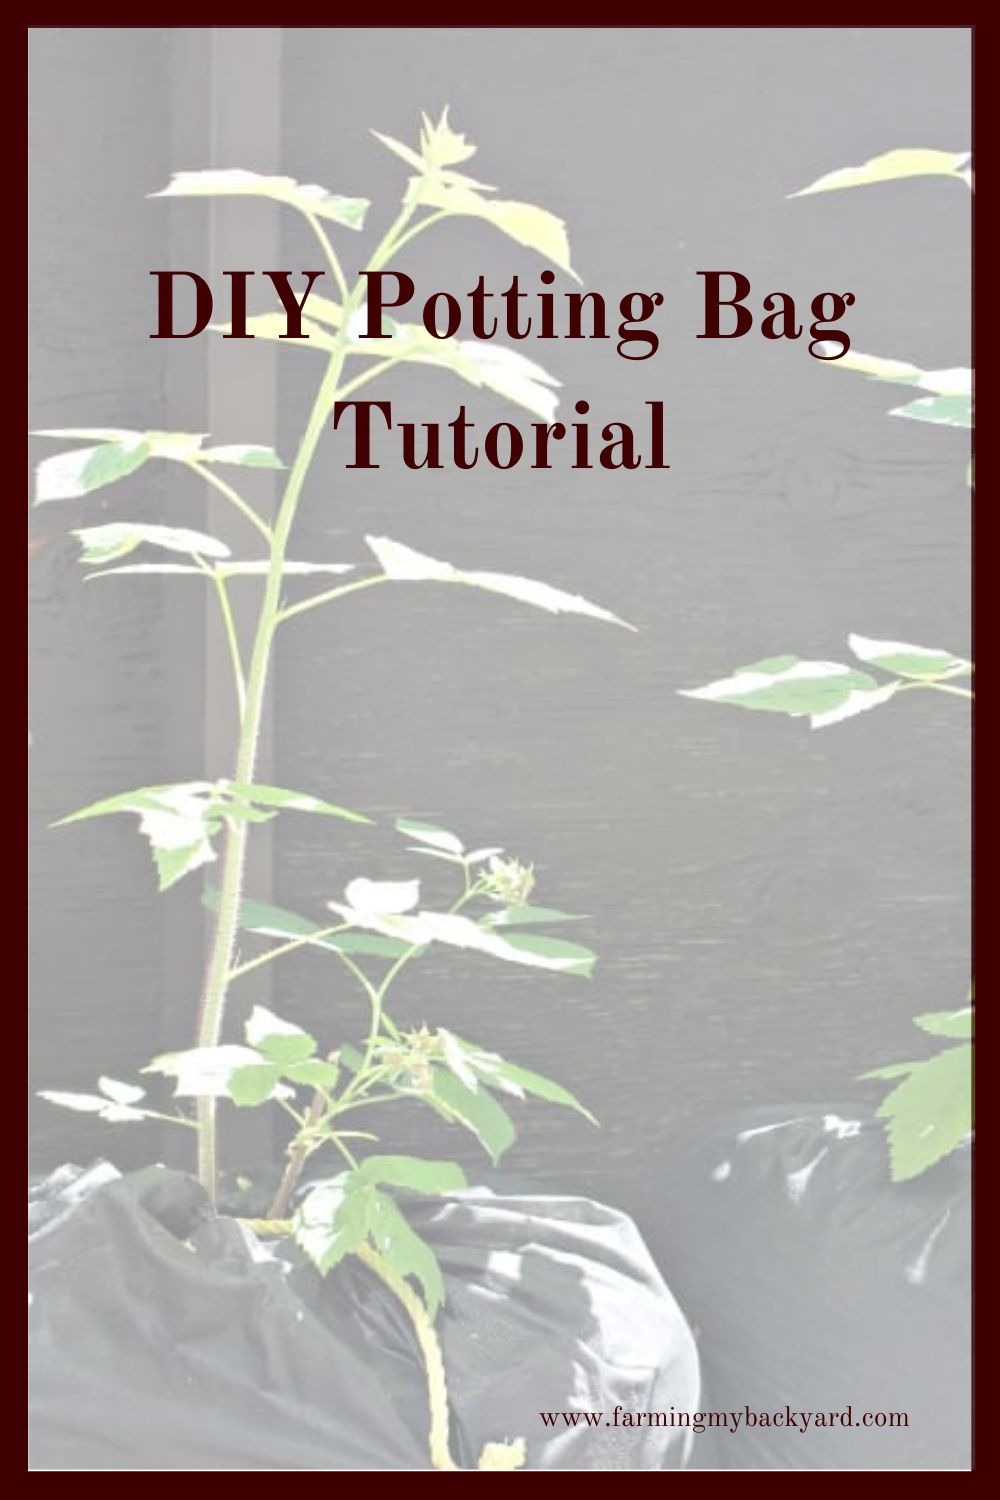 Potting bags are an easy to make project when you need portable planting space or are just looking to maximize the space you have.